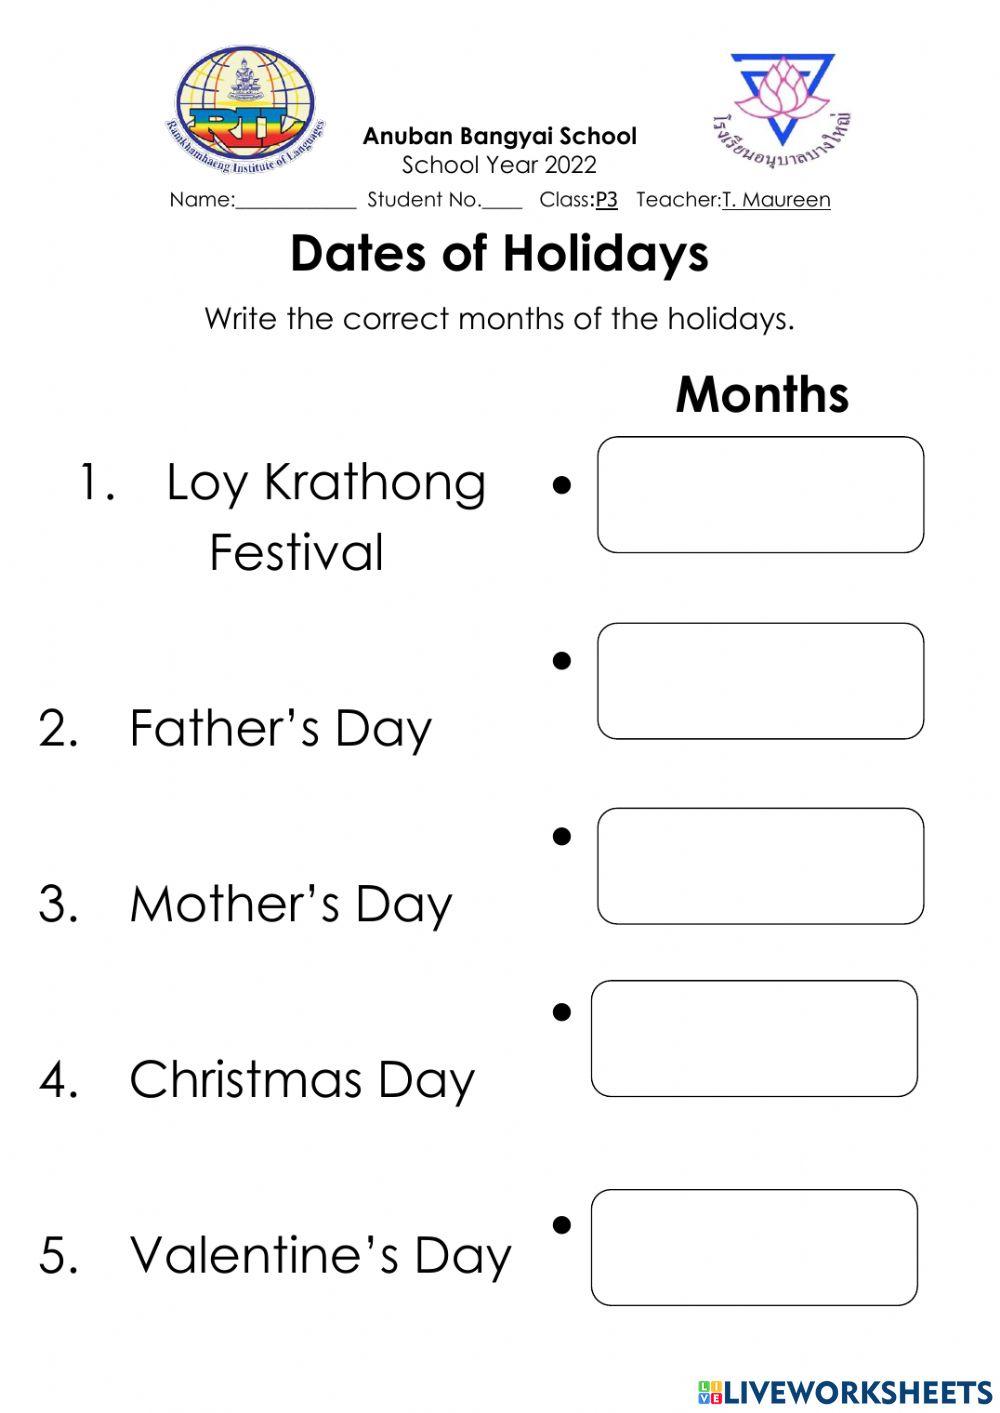 Dates of the Holidays